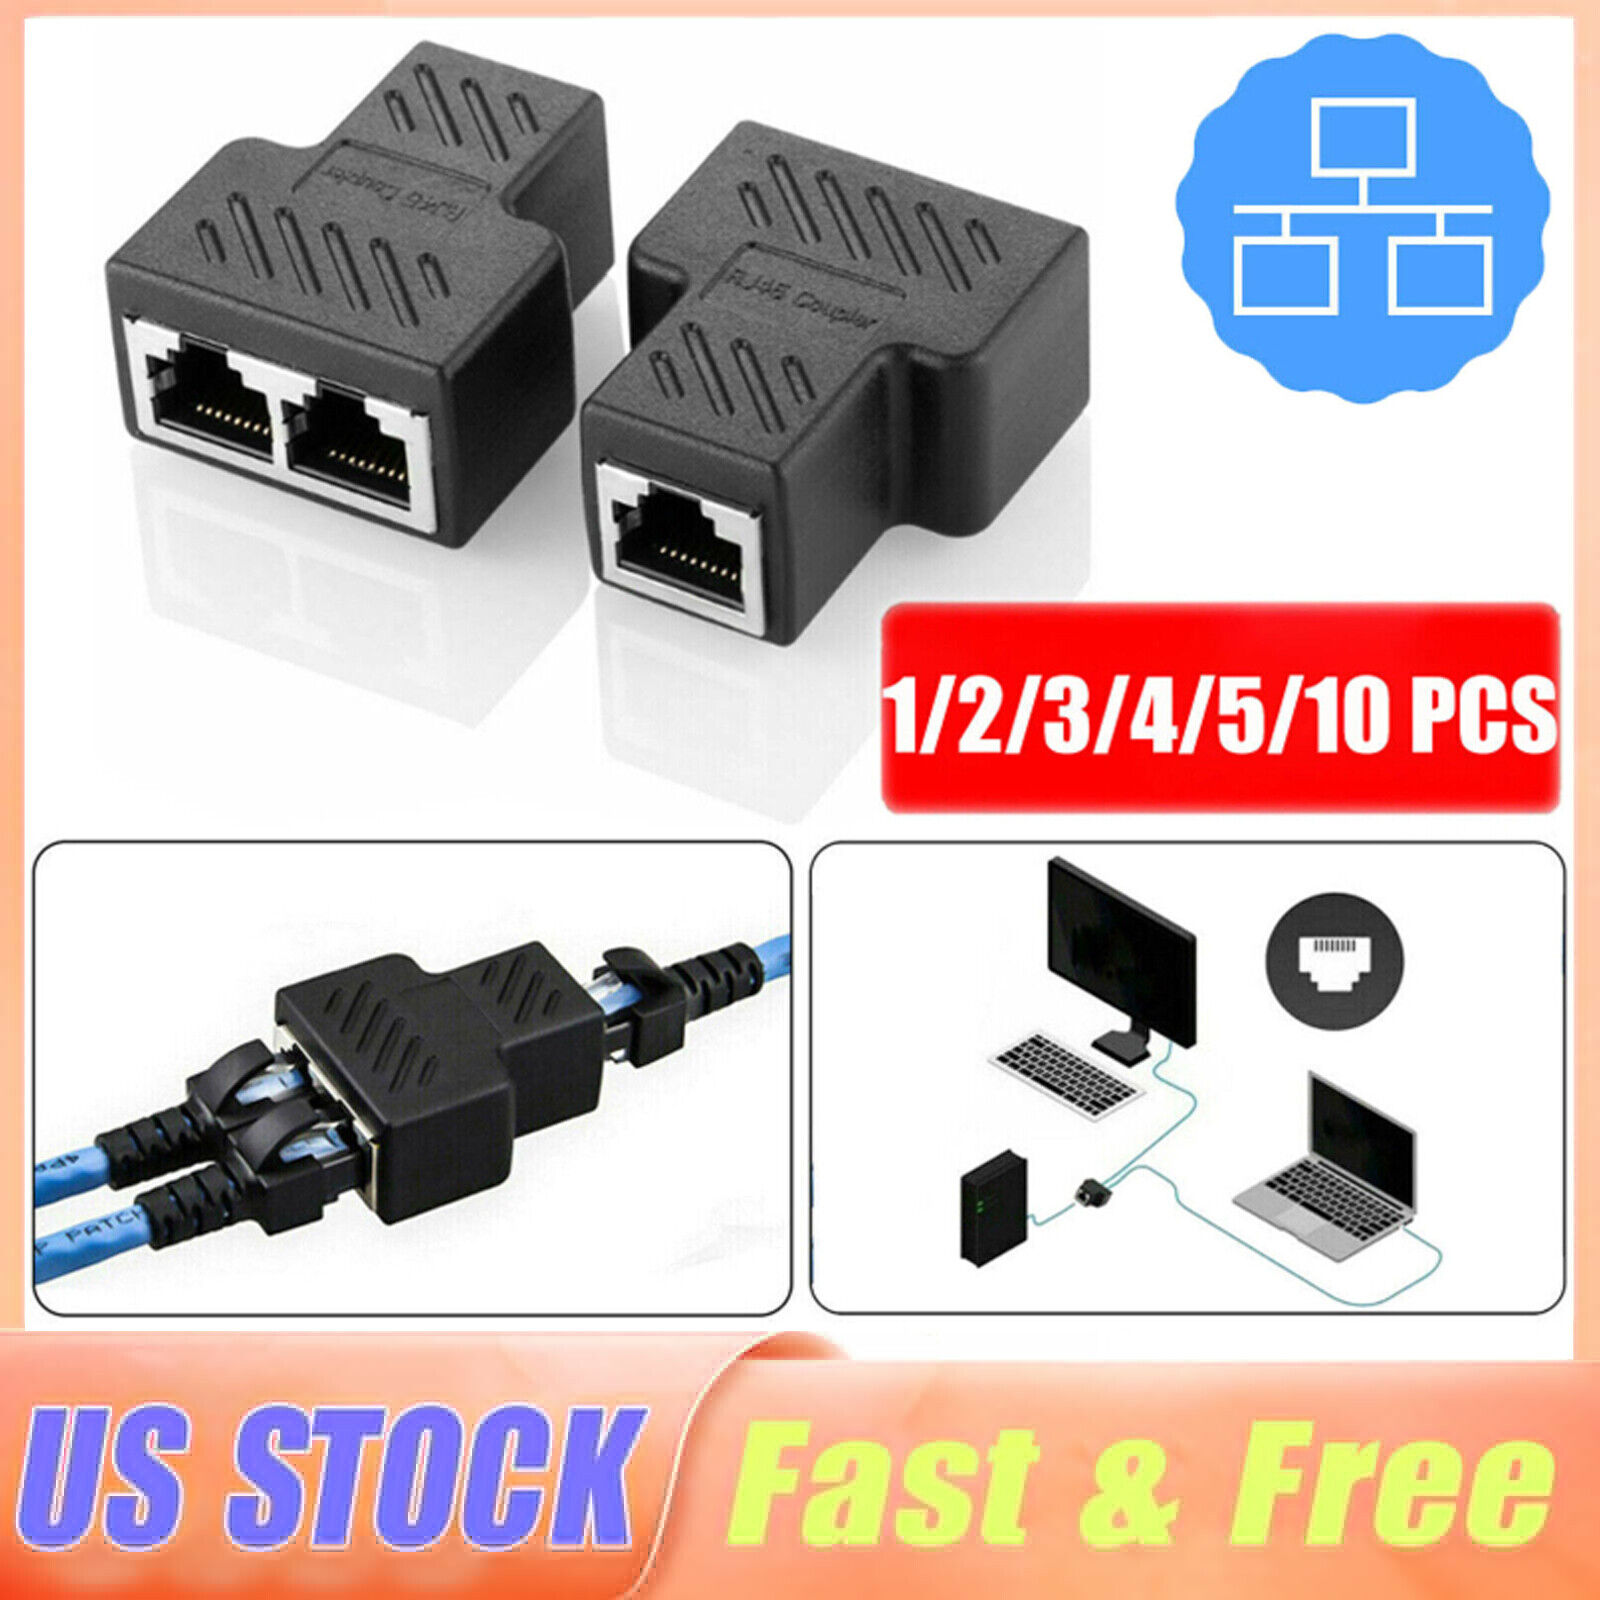 RJ45 Splitter Adapter LAN Ethernet Cable 1-2 Way Dual Female Port Connector NEW